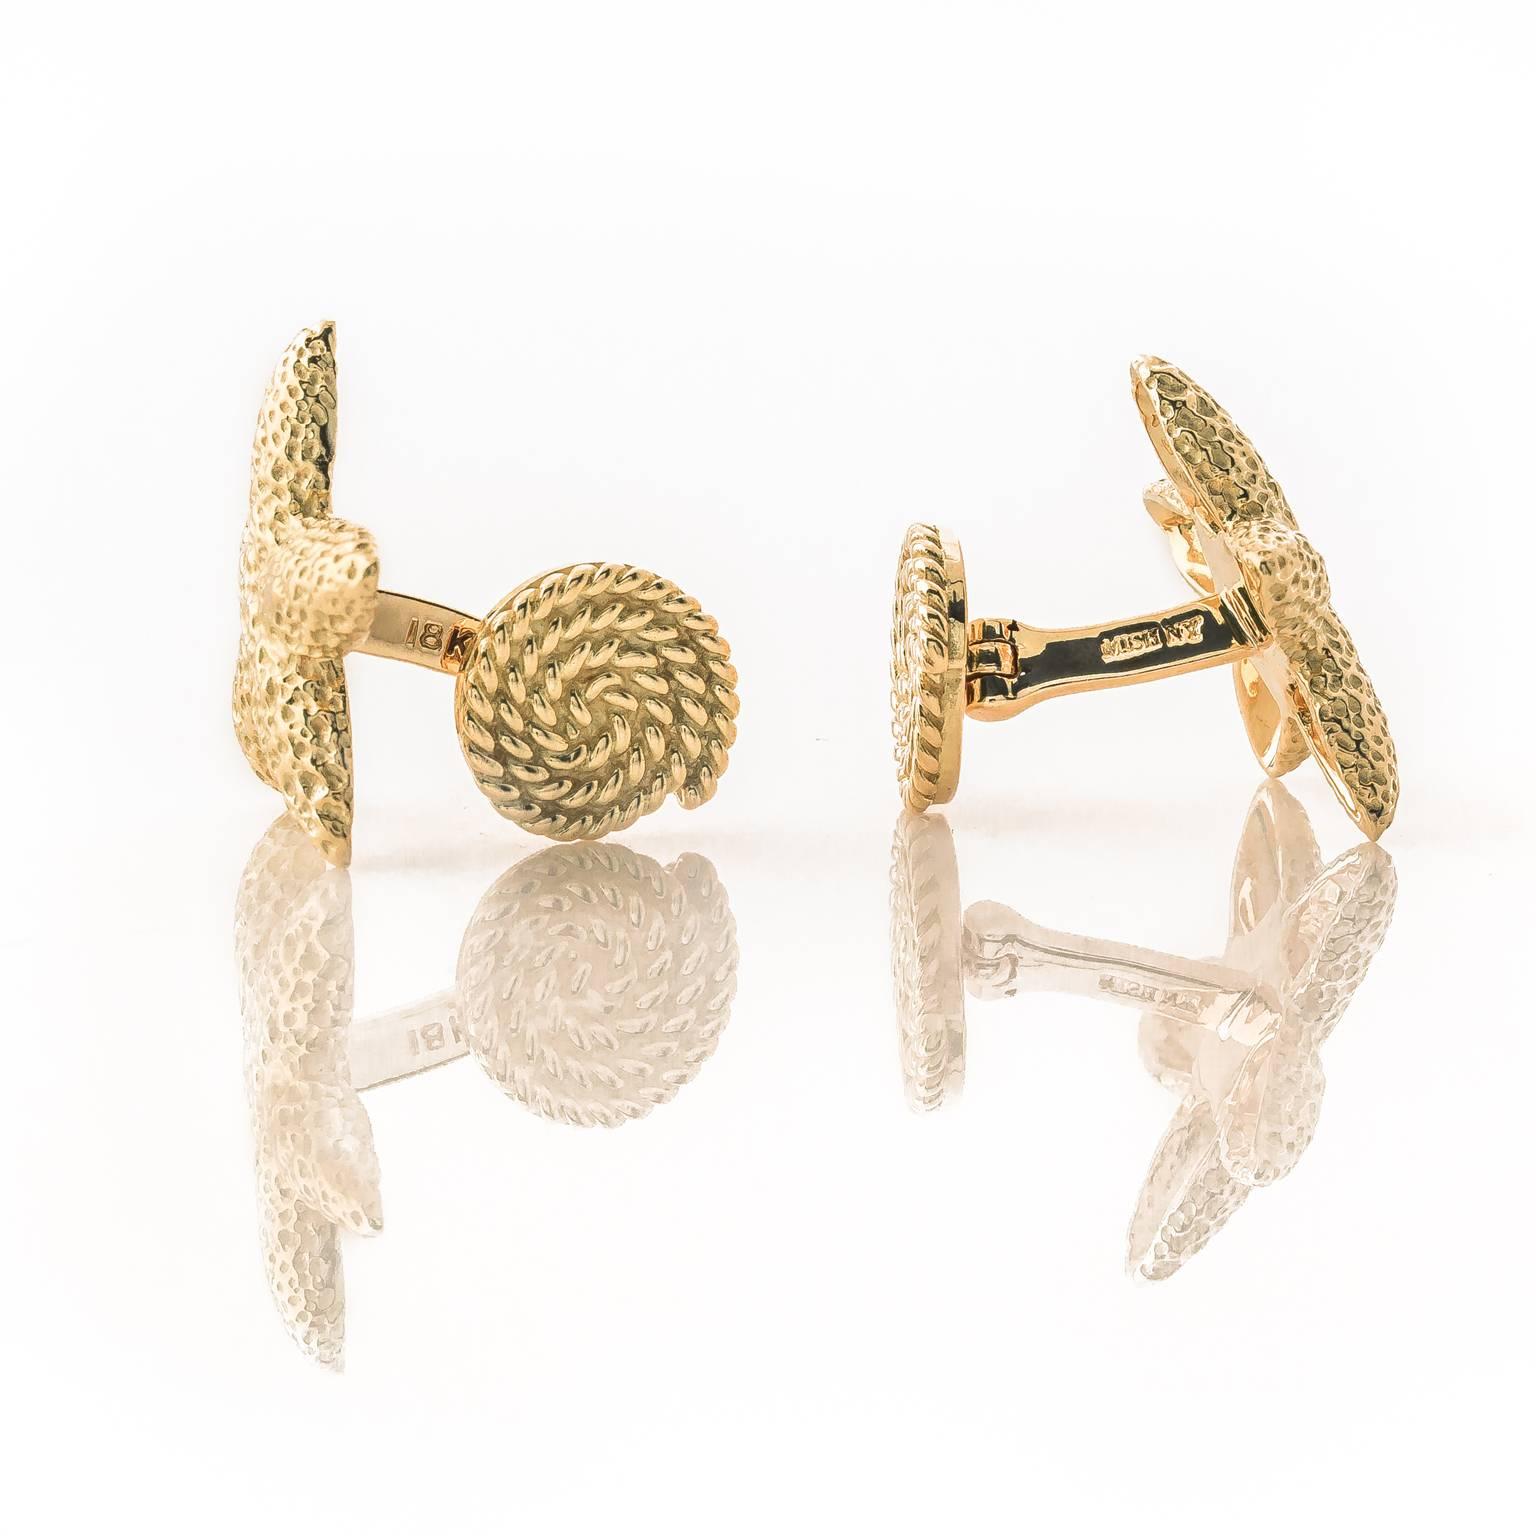 Exquisite pair of 18k yellow gold starfish cufflinks. Feature a textured finish and a nautical rope design toggle.

Stamped MISH NY